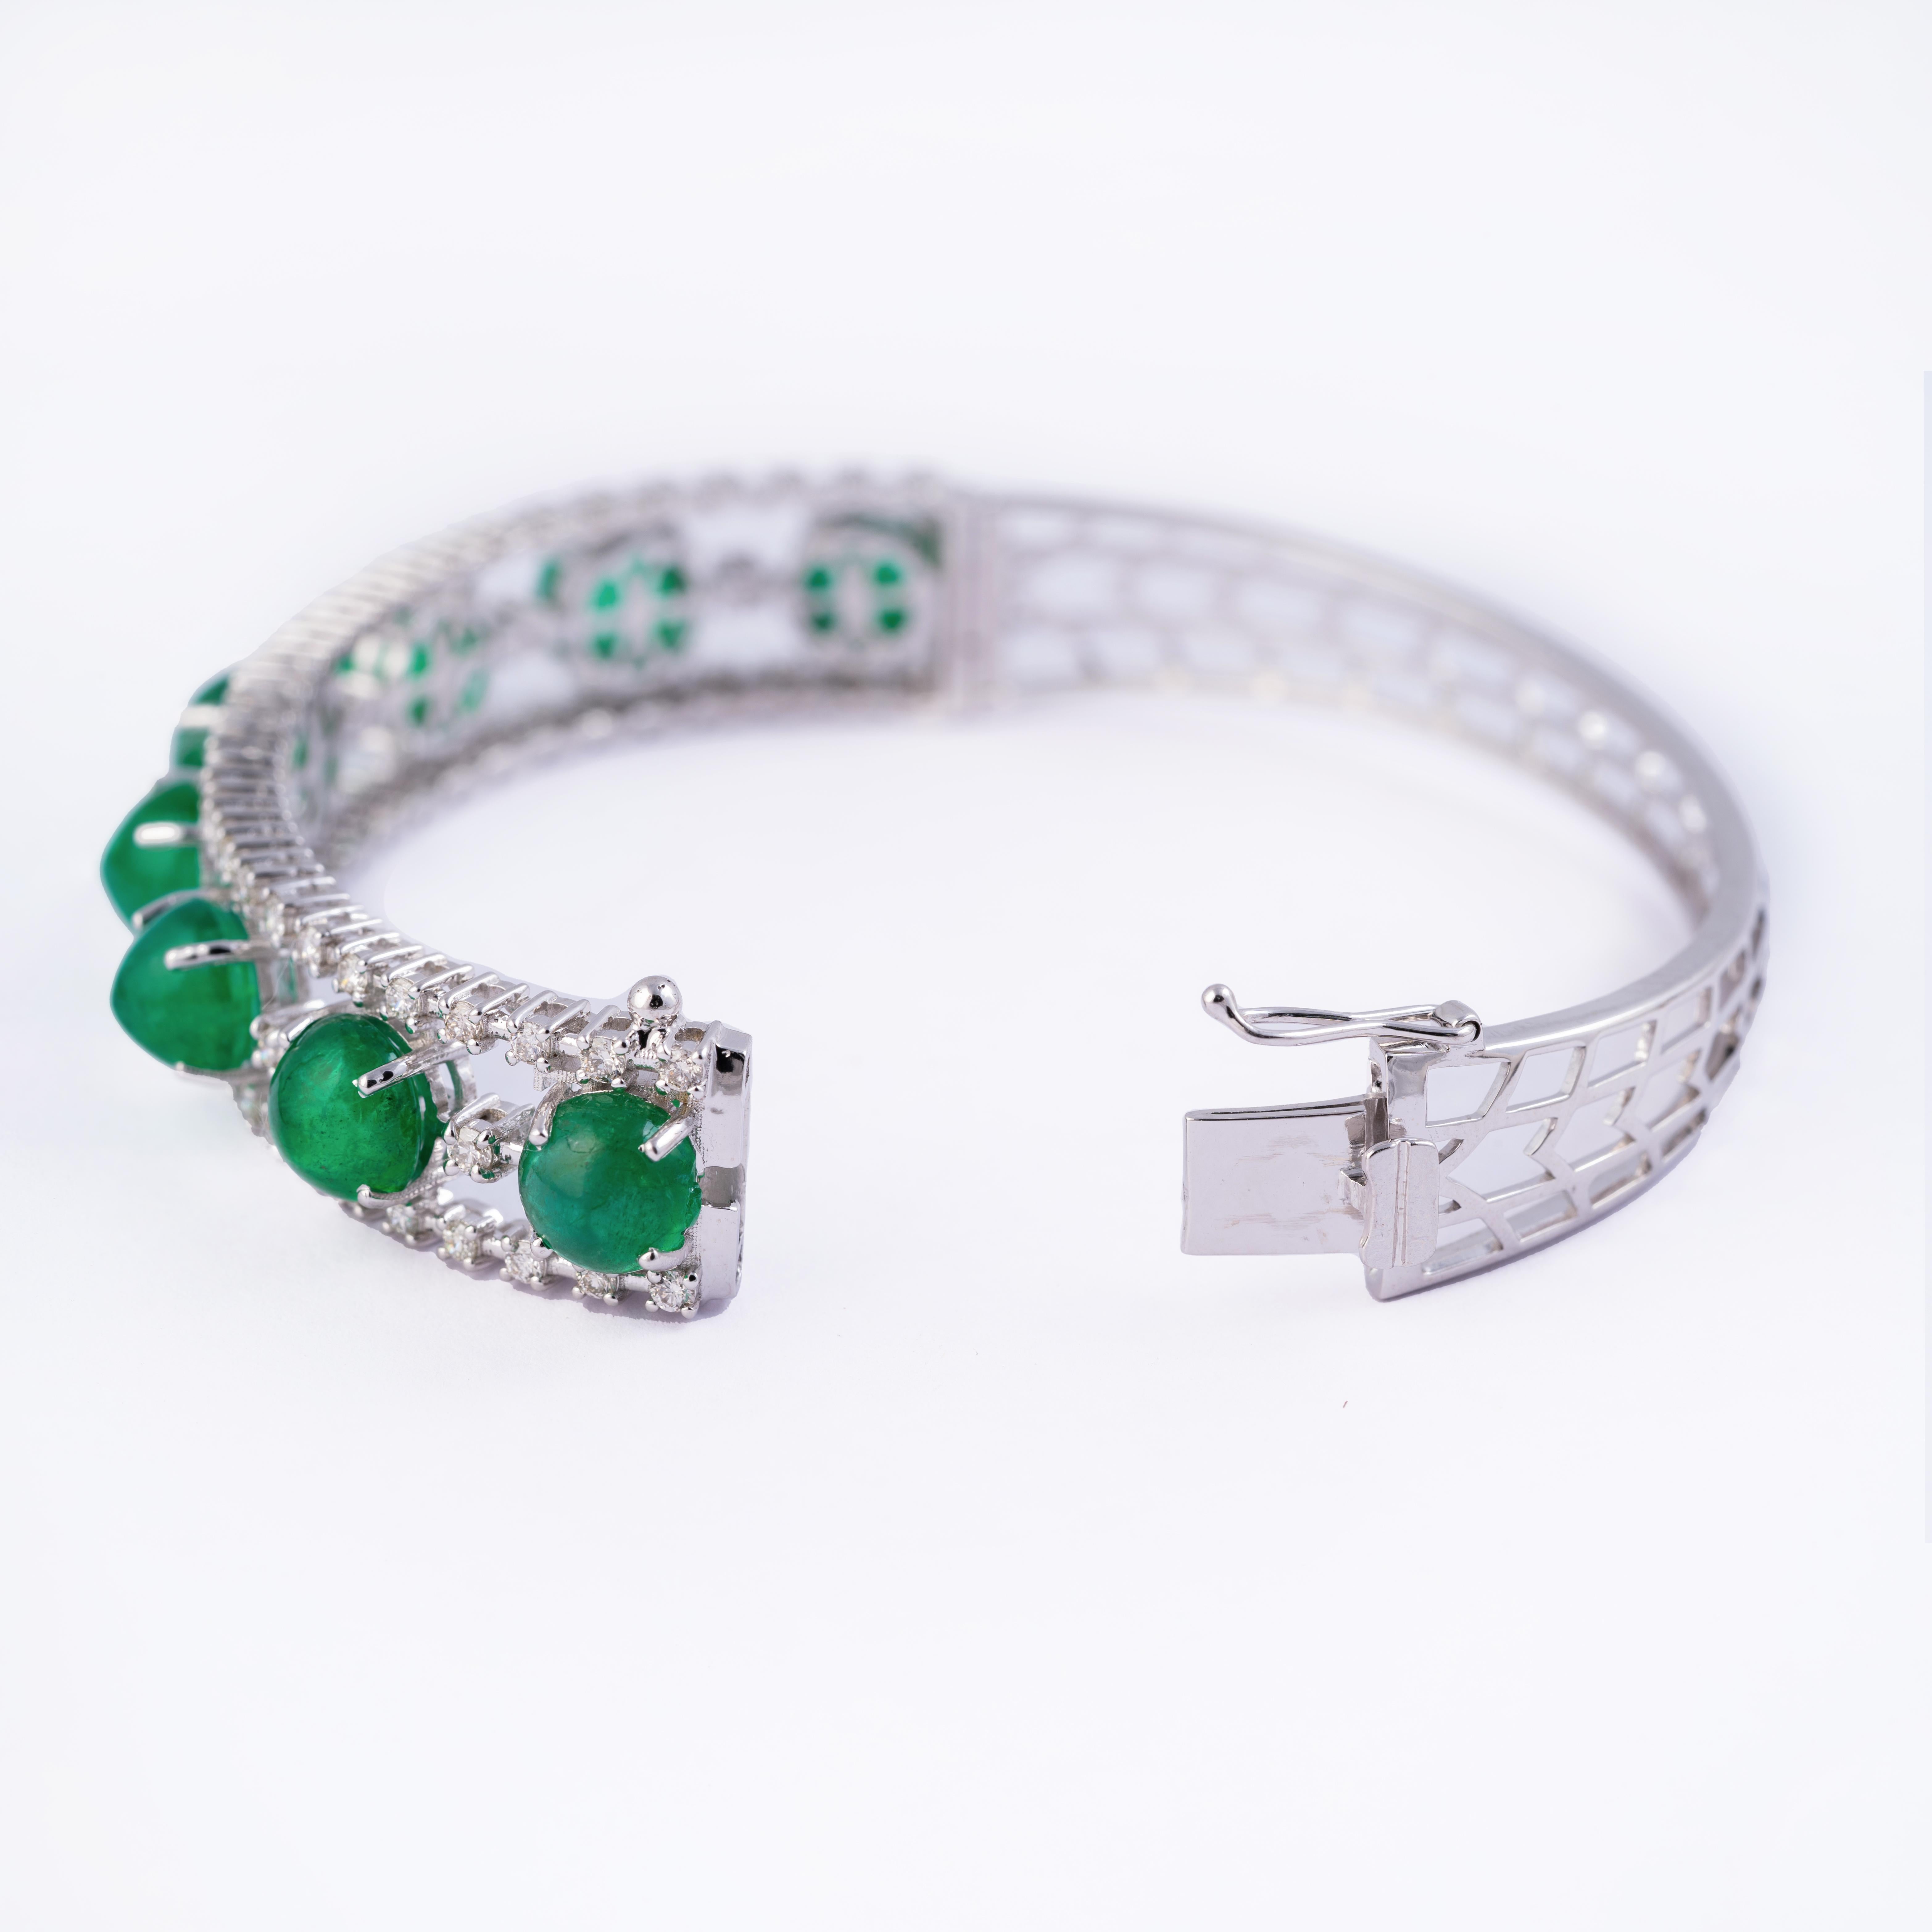 Emerald Cut 15.18 Carats Natural Zambian Emerald and 1.59 Cts Diamond Bracelet in 14k Gold  For Sale